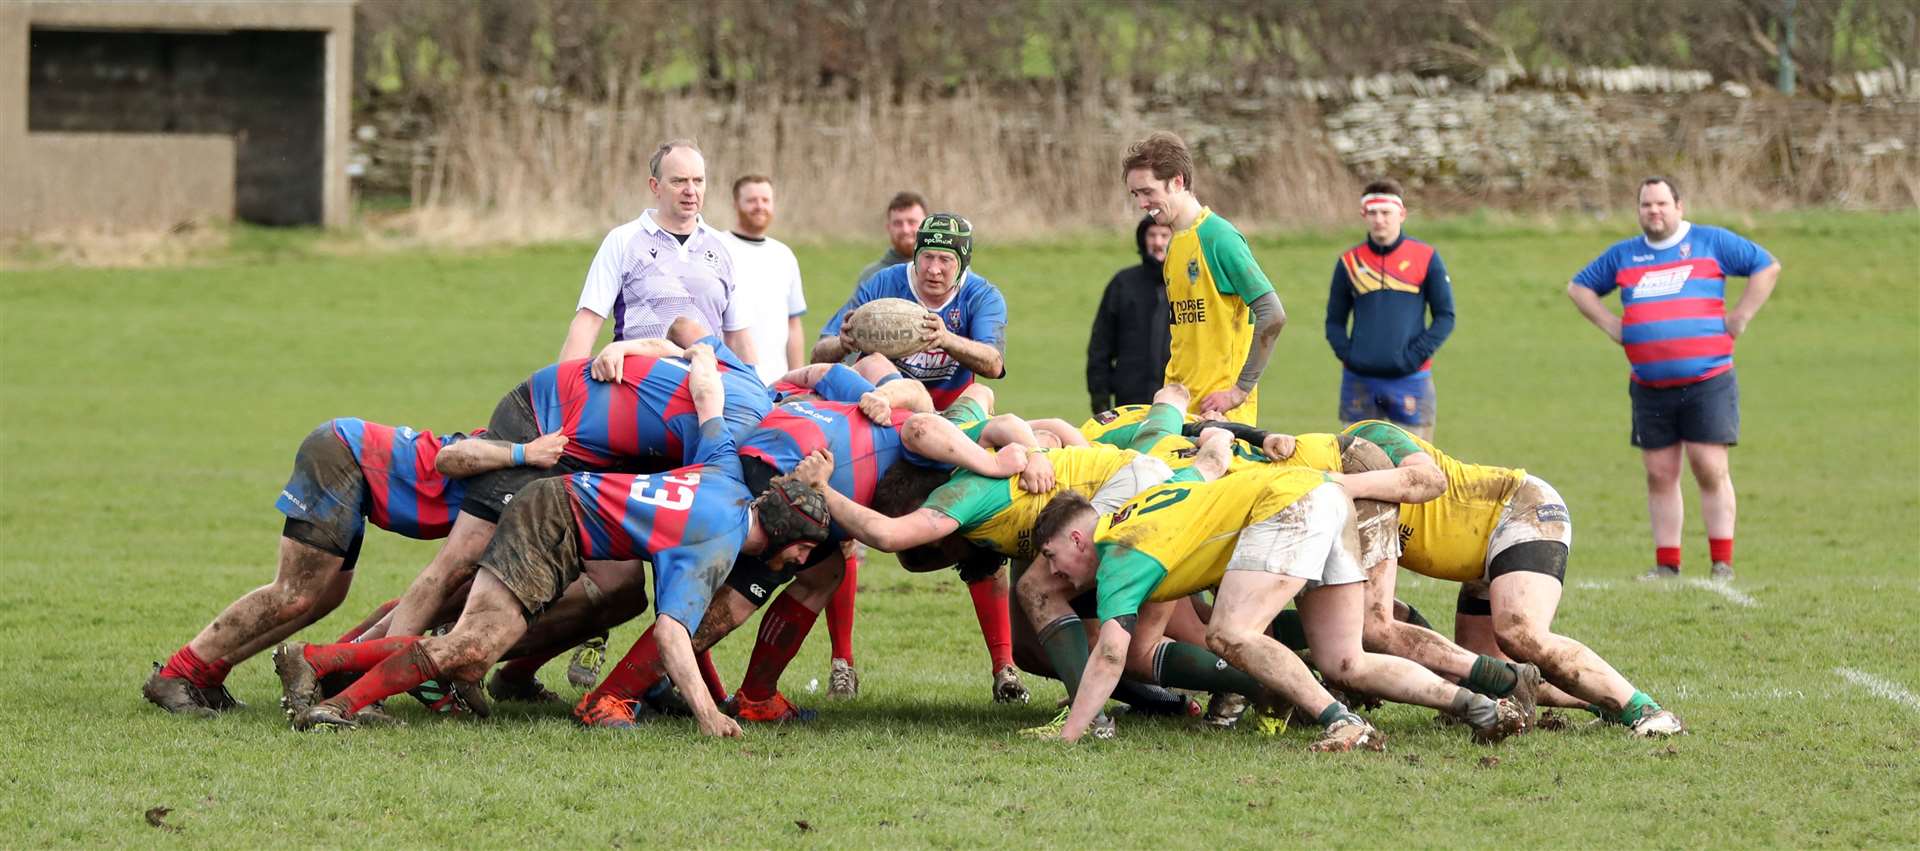 The scrum locking horns as Caithness 2nd XV take on Inverness Craig Dunain at Millbank. Picture: James Gunn